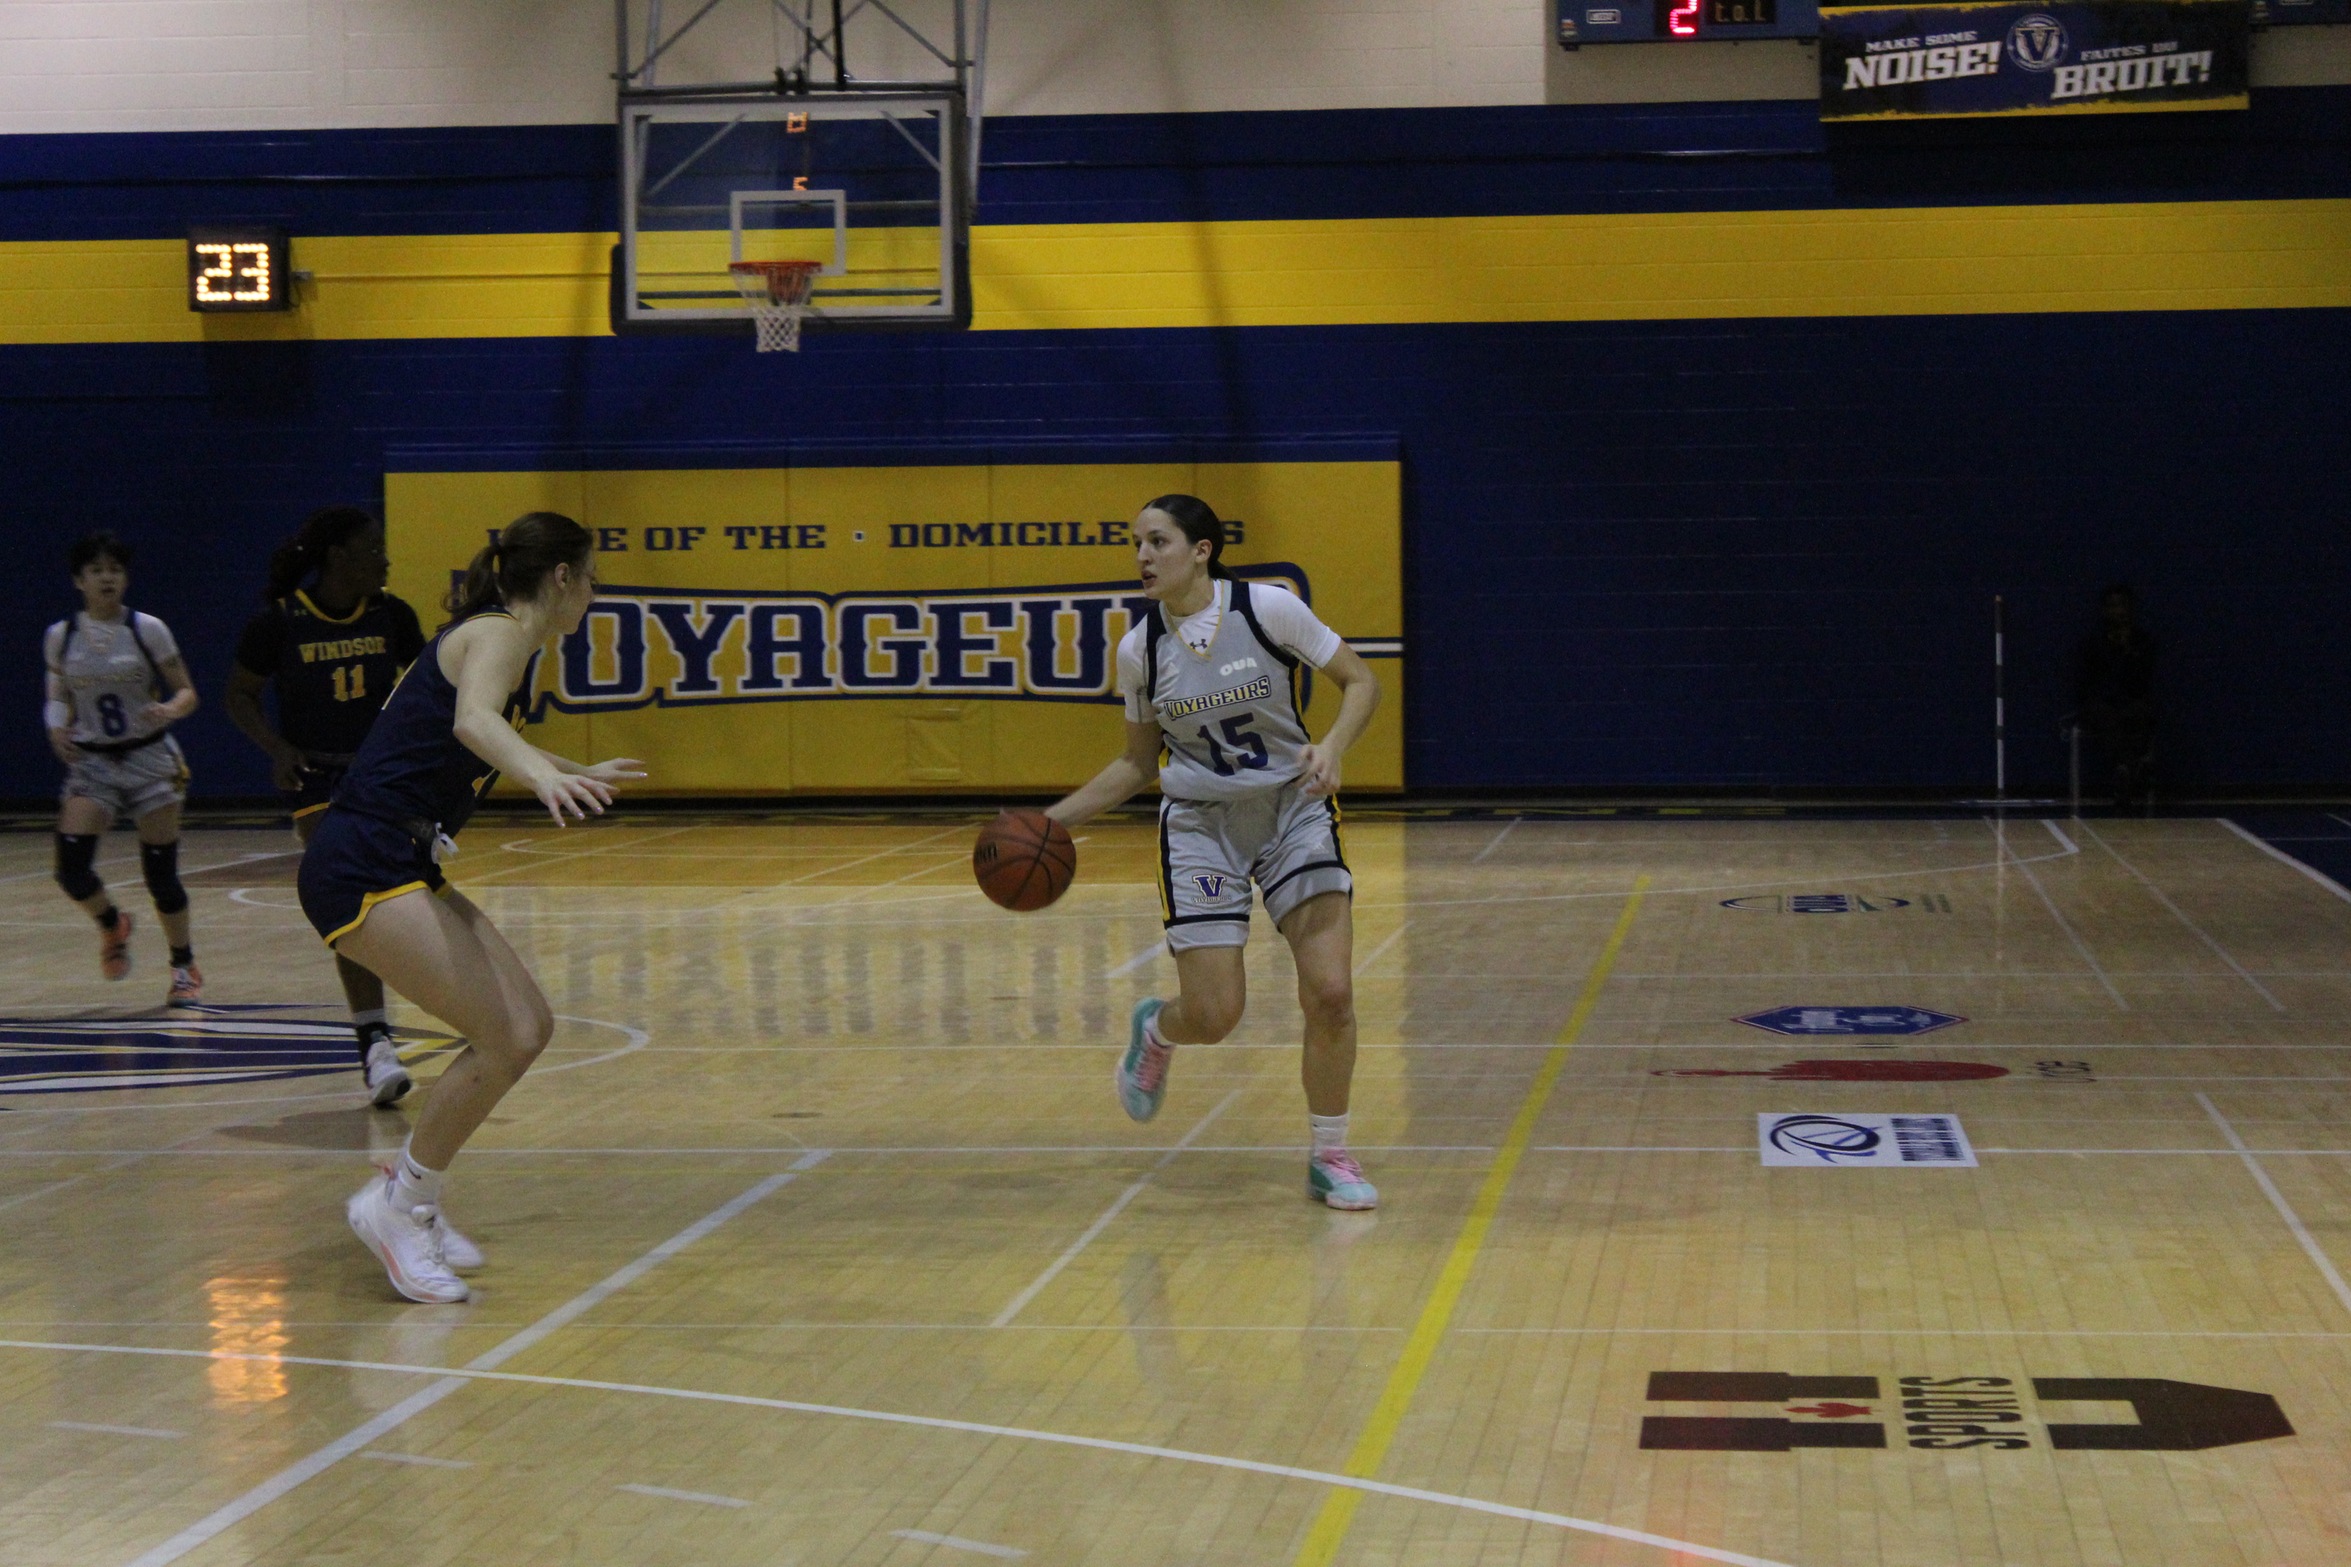 Molly Adams moving the ball up the court - Sarah Makcrow